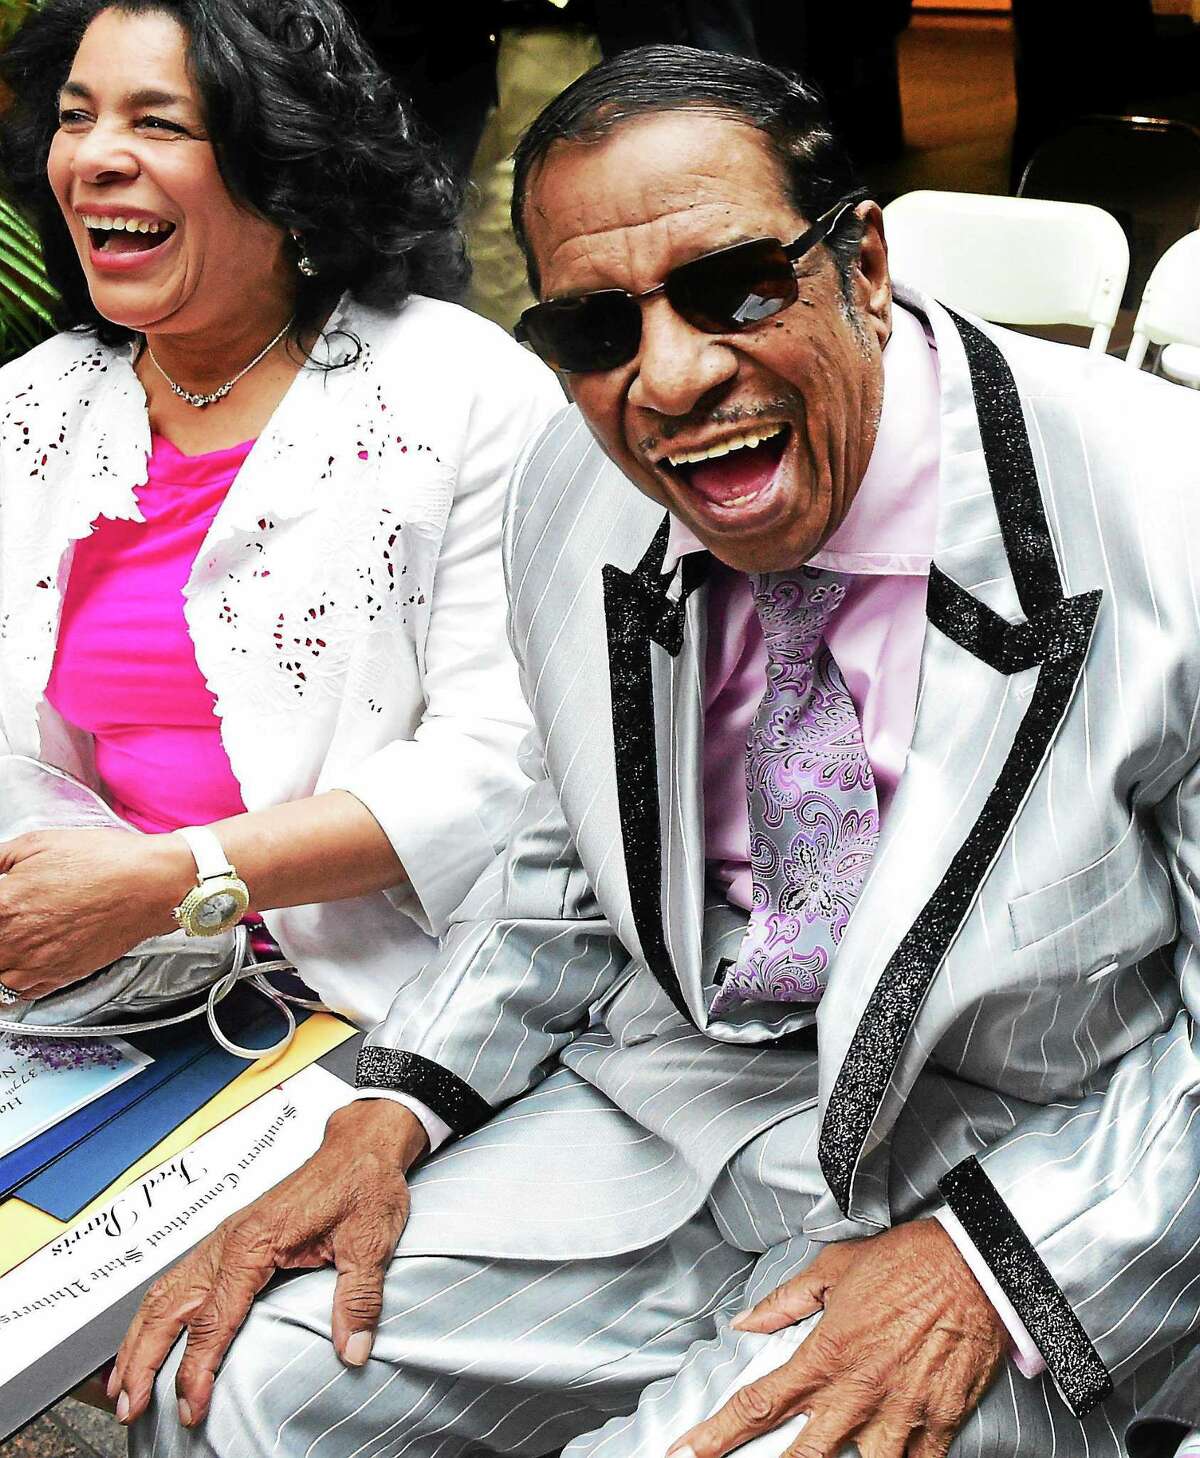 (Peter Hvizdak - New Haven Register) ¬ Fred Parris of Hamden, founder of New Haven's legendary New Doo-Wop group the Five Satins, right, and his wife Emma Parris, left, laugh with well-wishers aftertribute to him and the Five Satins at a City Hall ceremony Thursday, April 23, 2015 to commemorate the city's 377th birthday. Five commemorative trees along Church Street and Orange Street werededicated to honor the occasion. ¬